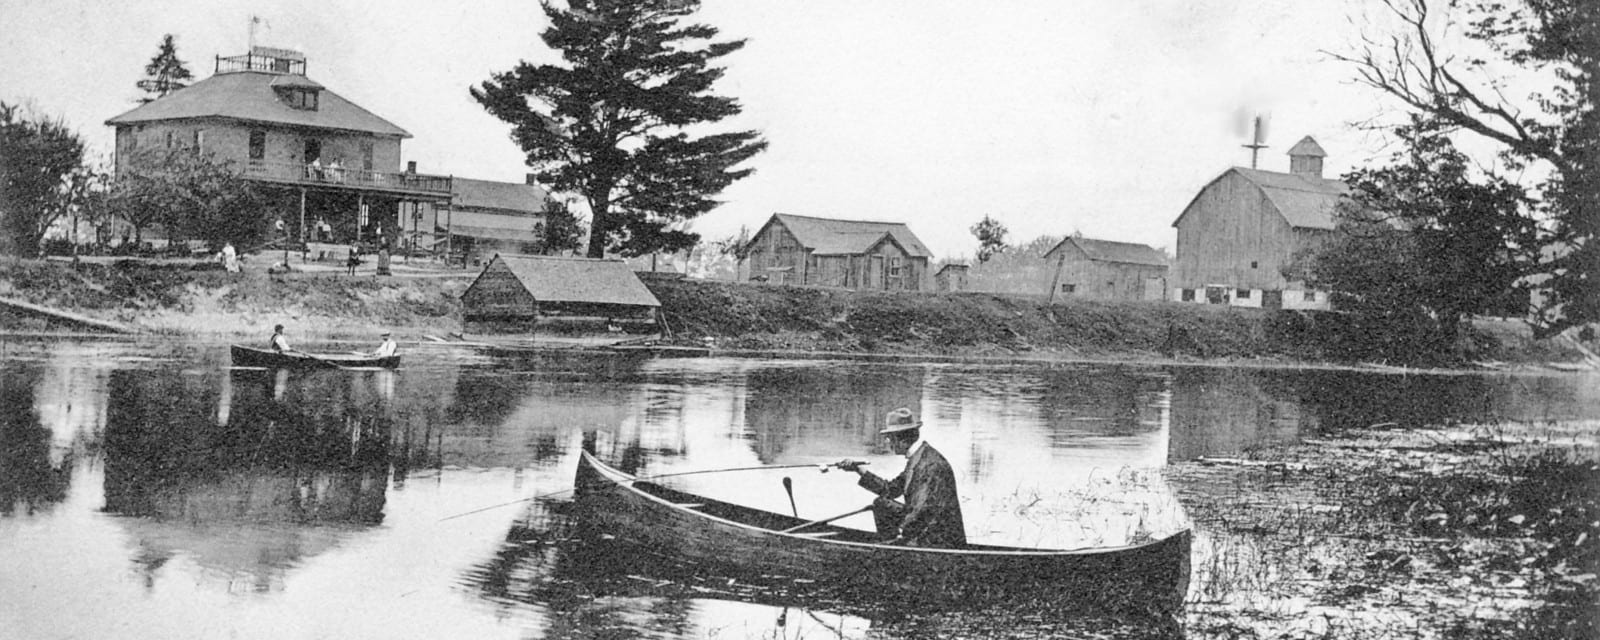 A man in boat